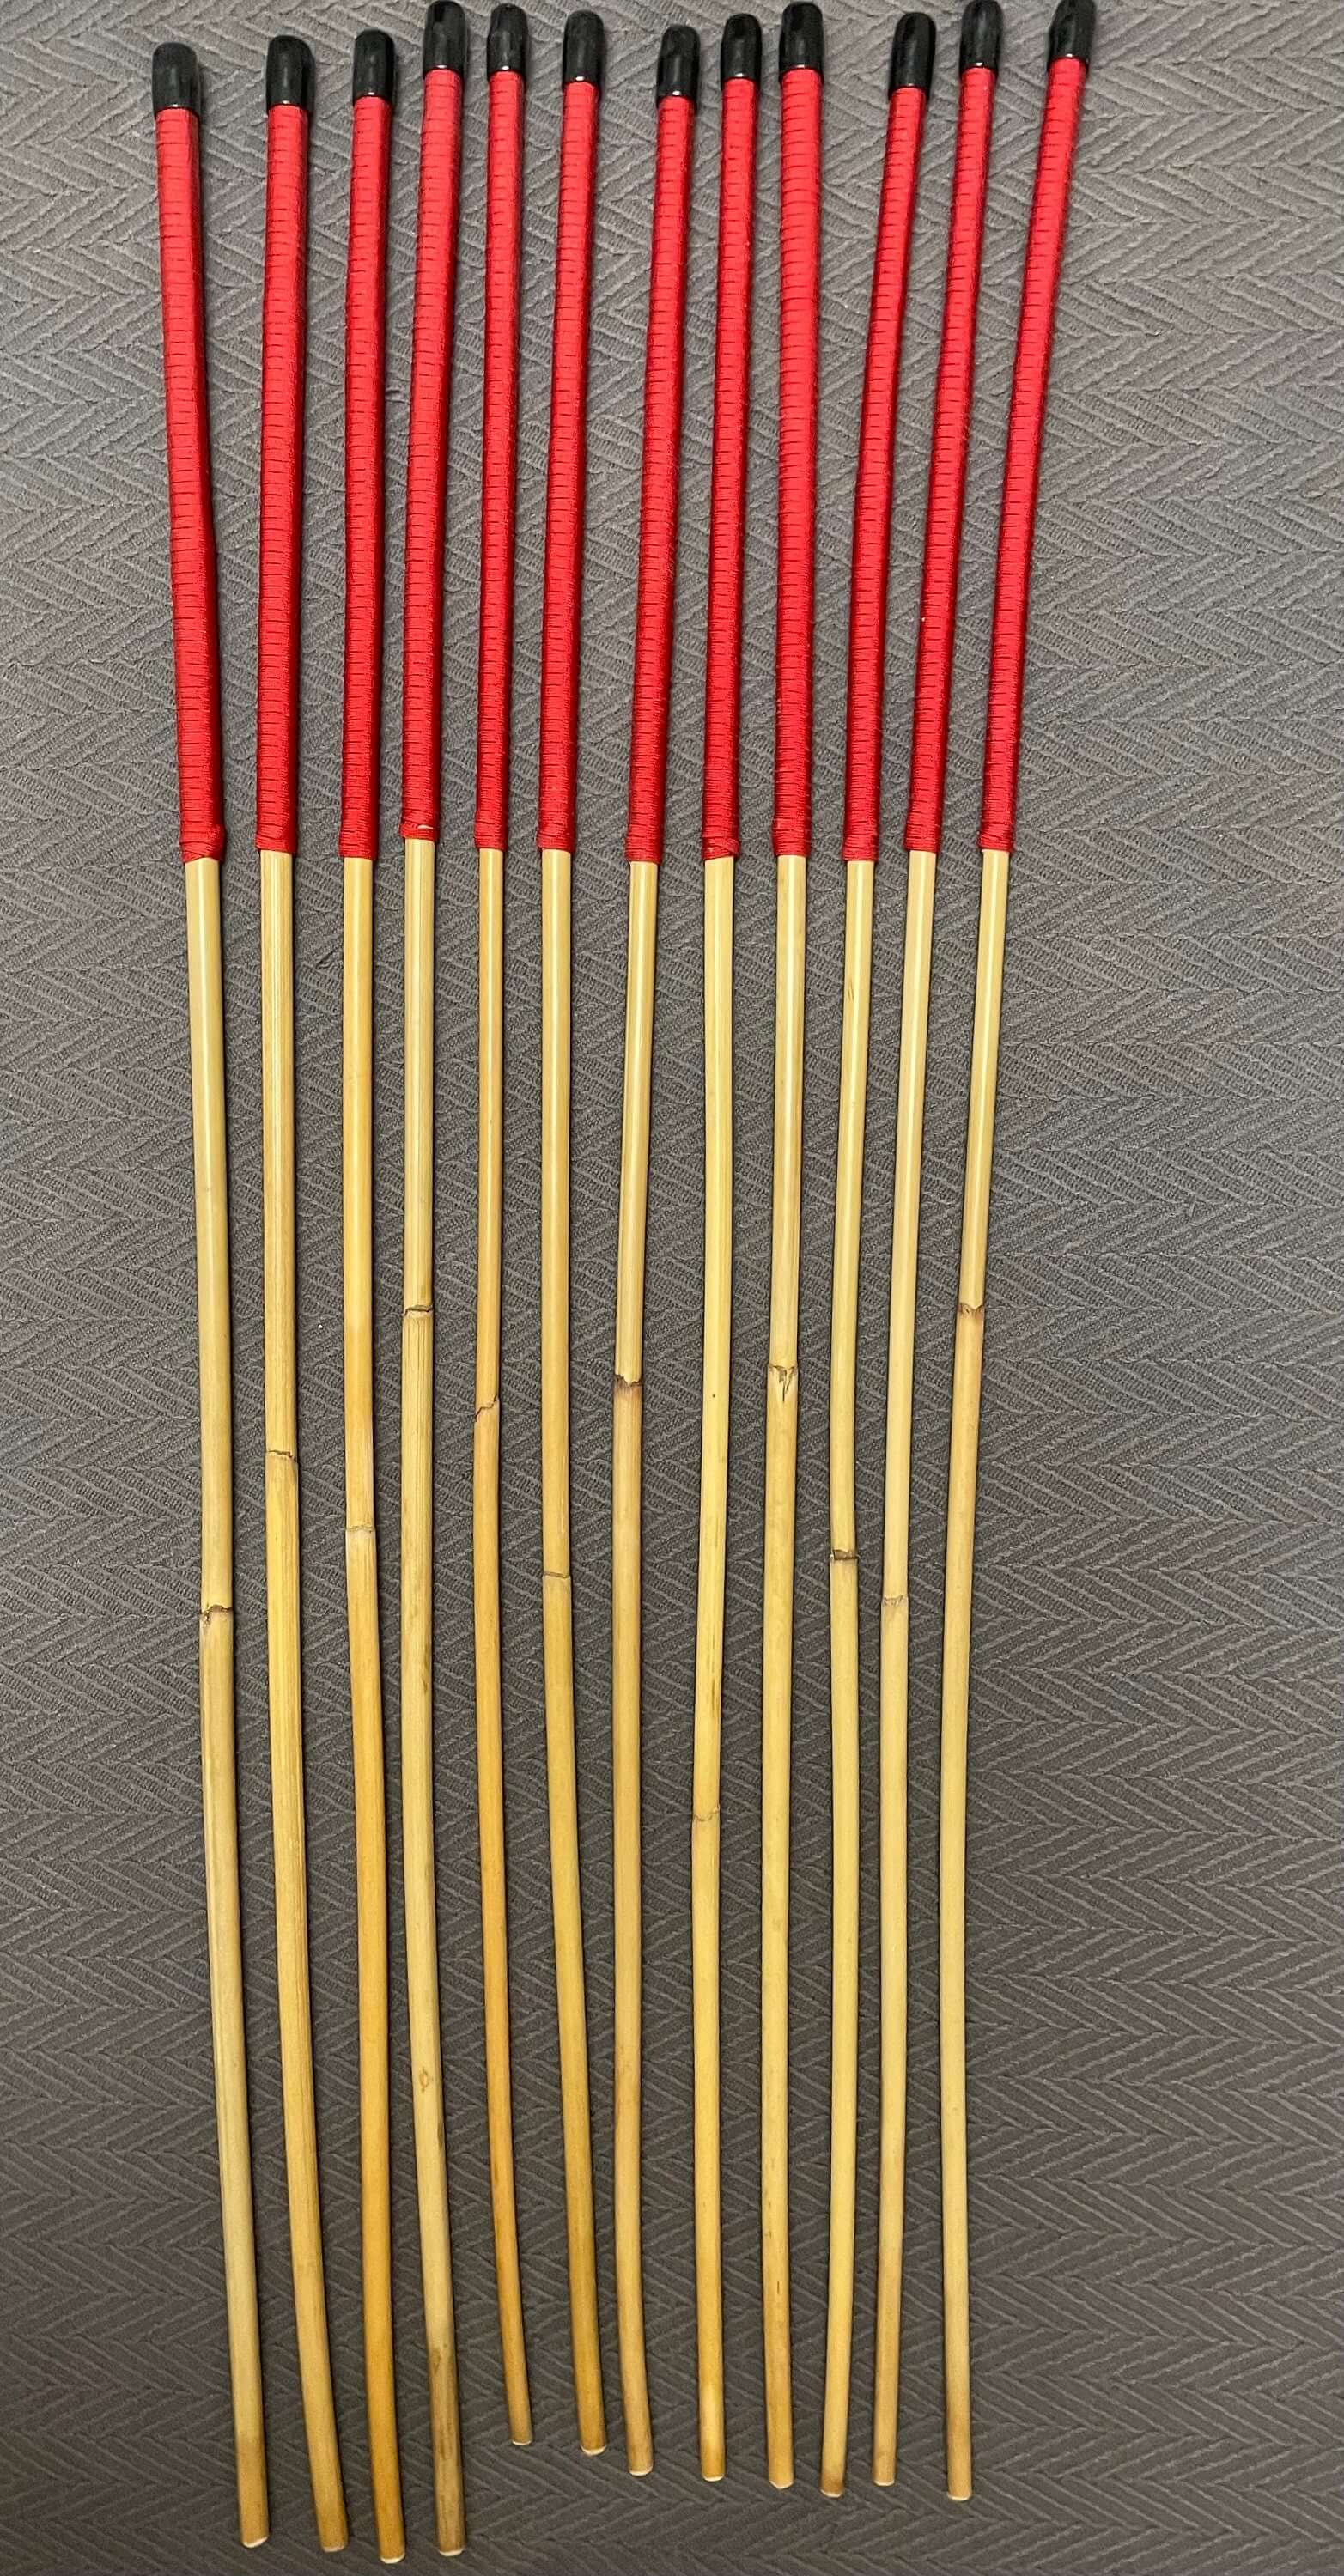 Set of 12 Dragon Rattan Canes / BDSM Canes wirh Red Paracord Handles